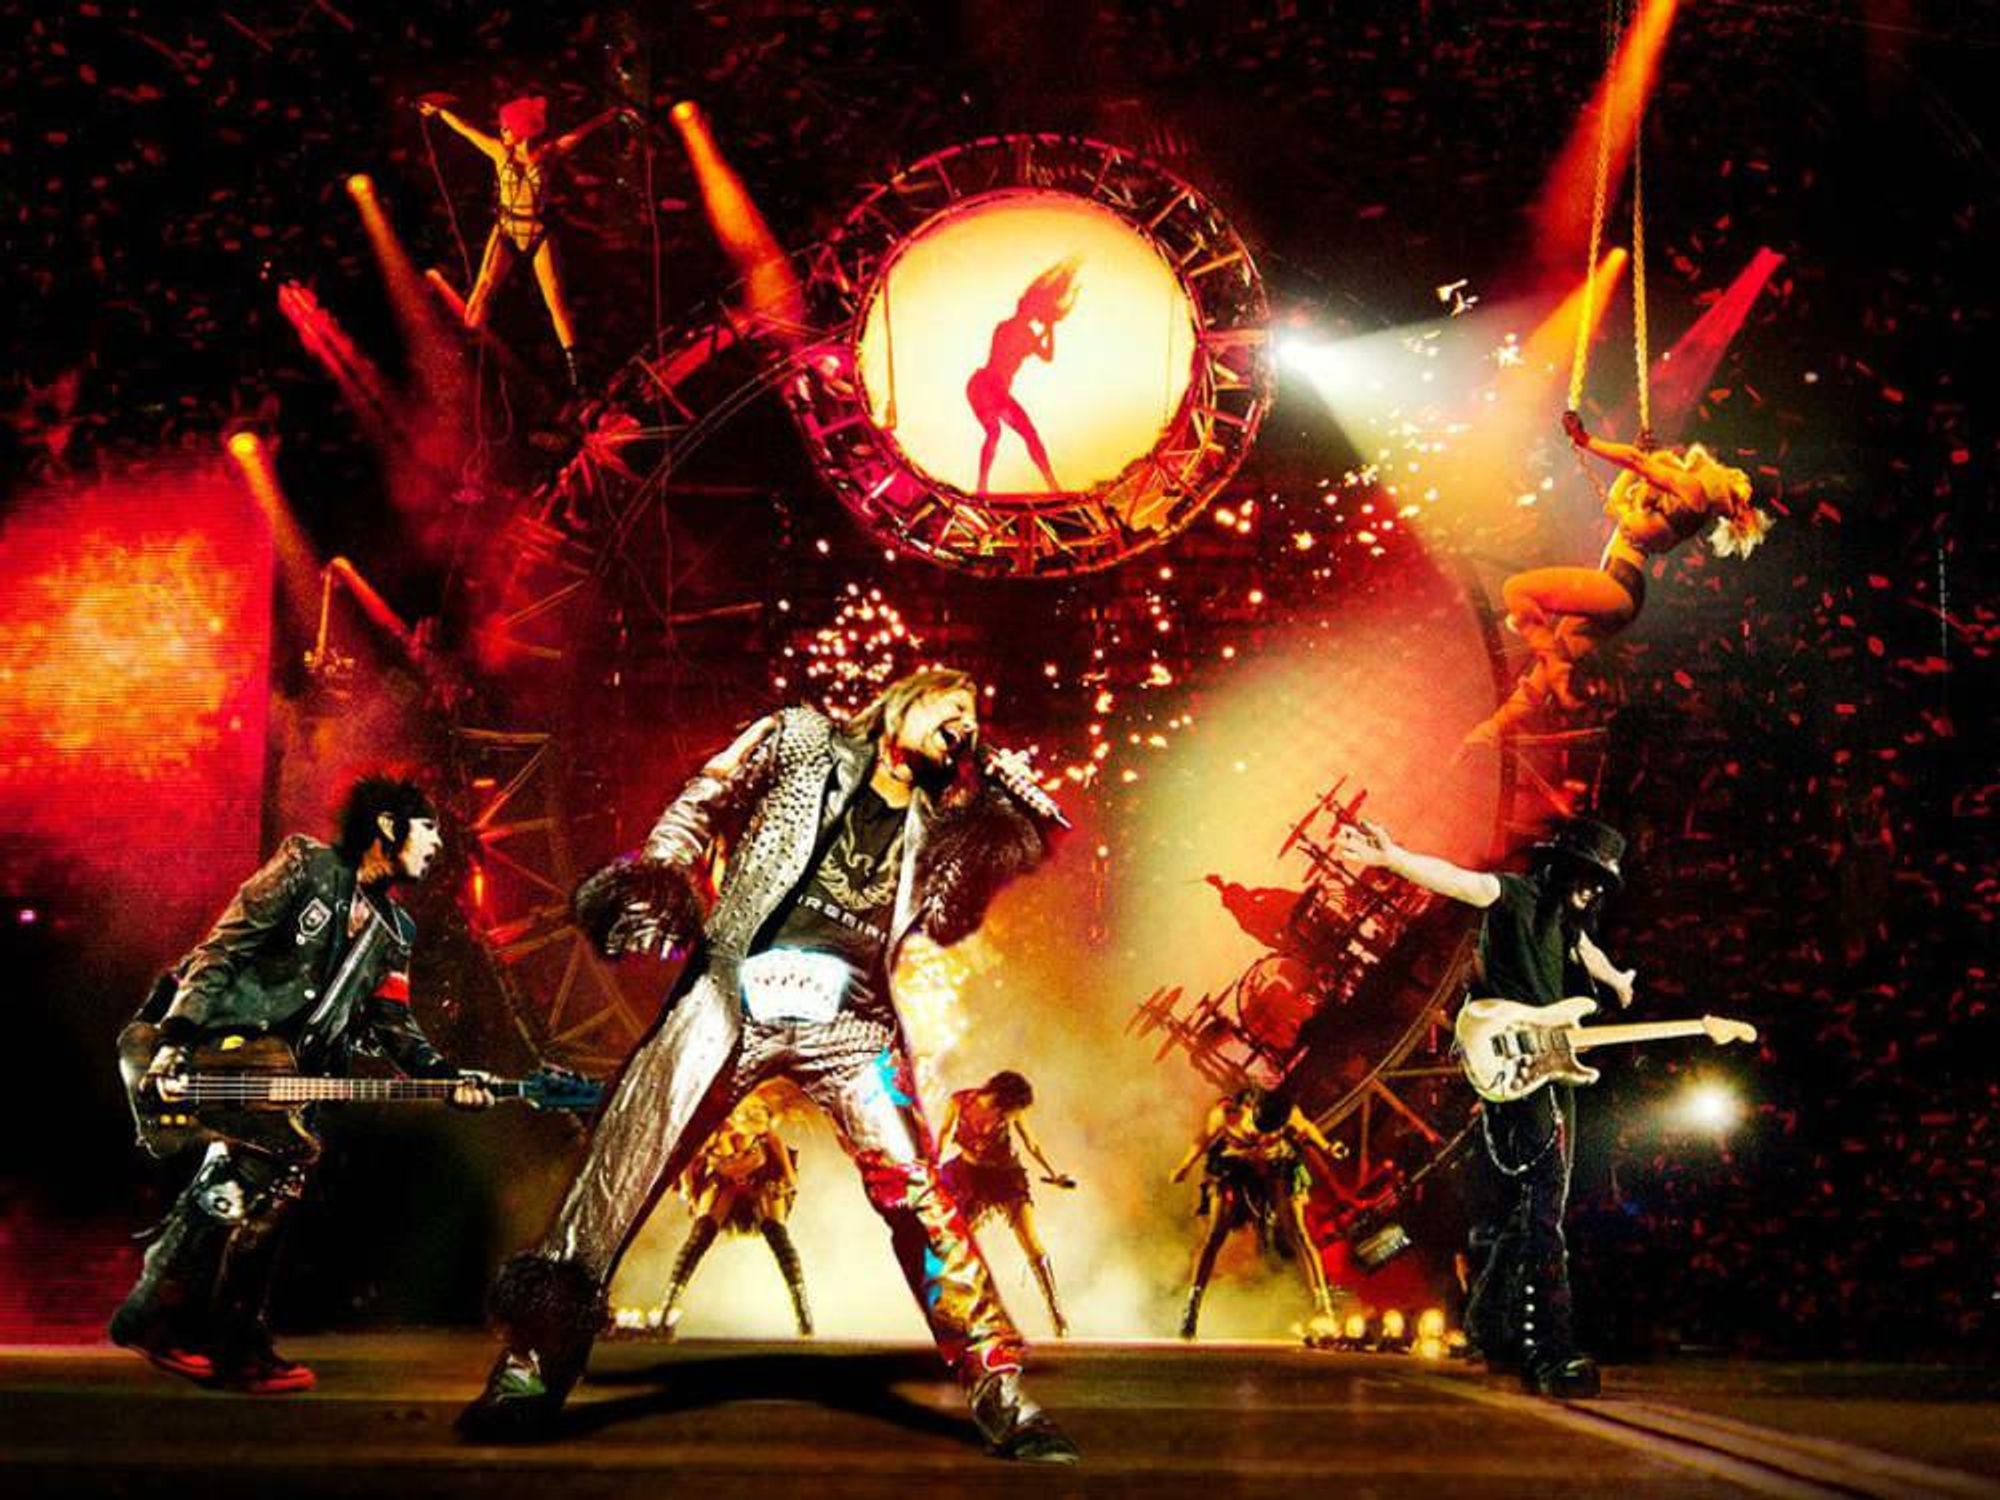 Globe Life Field - Arlington, are you ready to rock 'n' roll tomorrow  night? Def Leppard, Motley Crue, Poison, Joan Jett and the Blackhearts will  be taking the stage at Globe Life